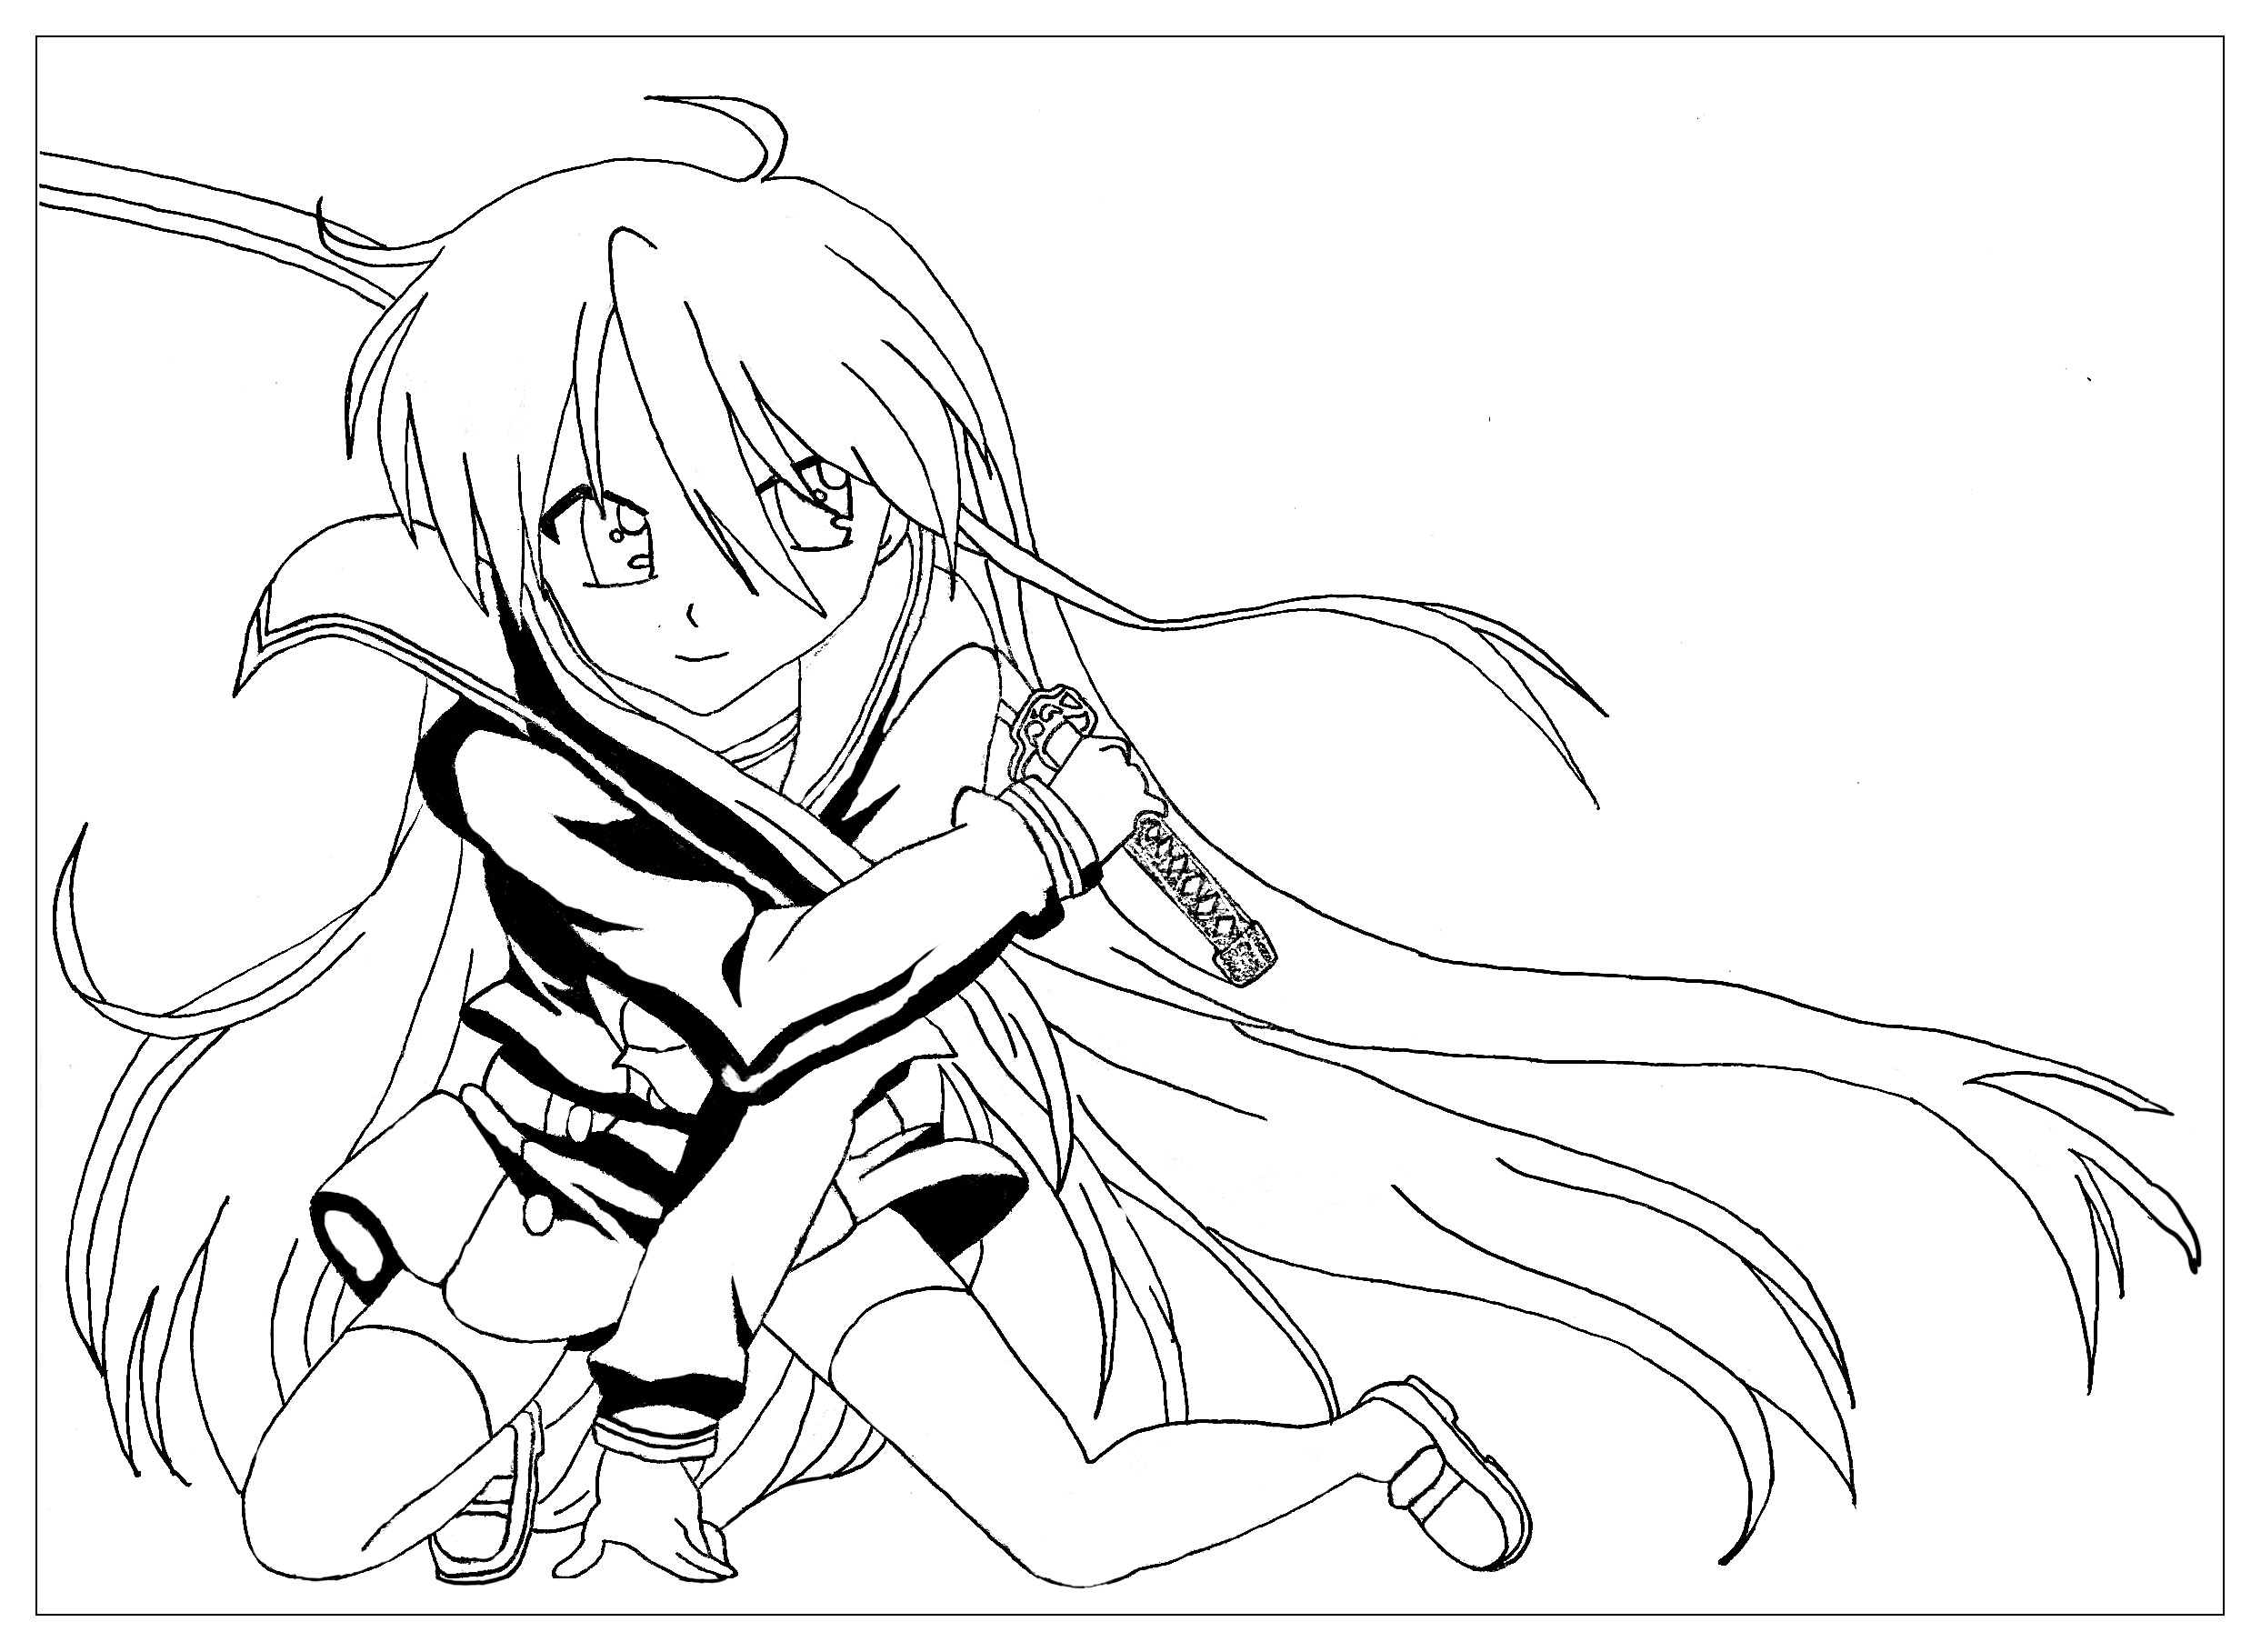 4100 Anime Girl Warrior Coloring Pages Images & Pictures In HD